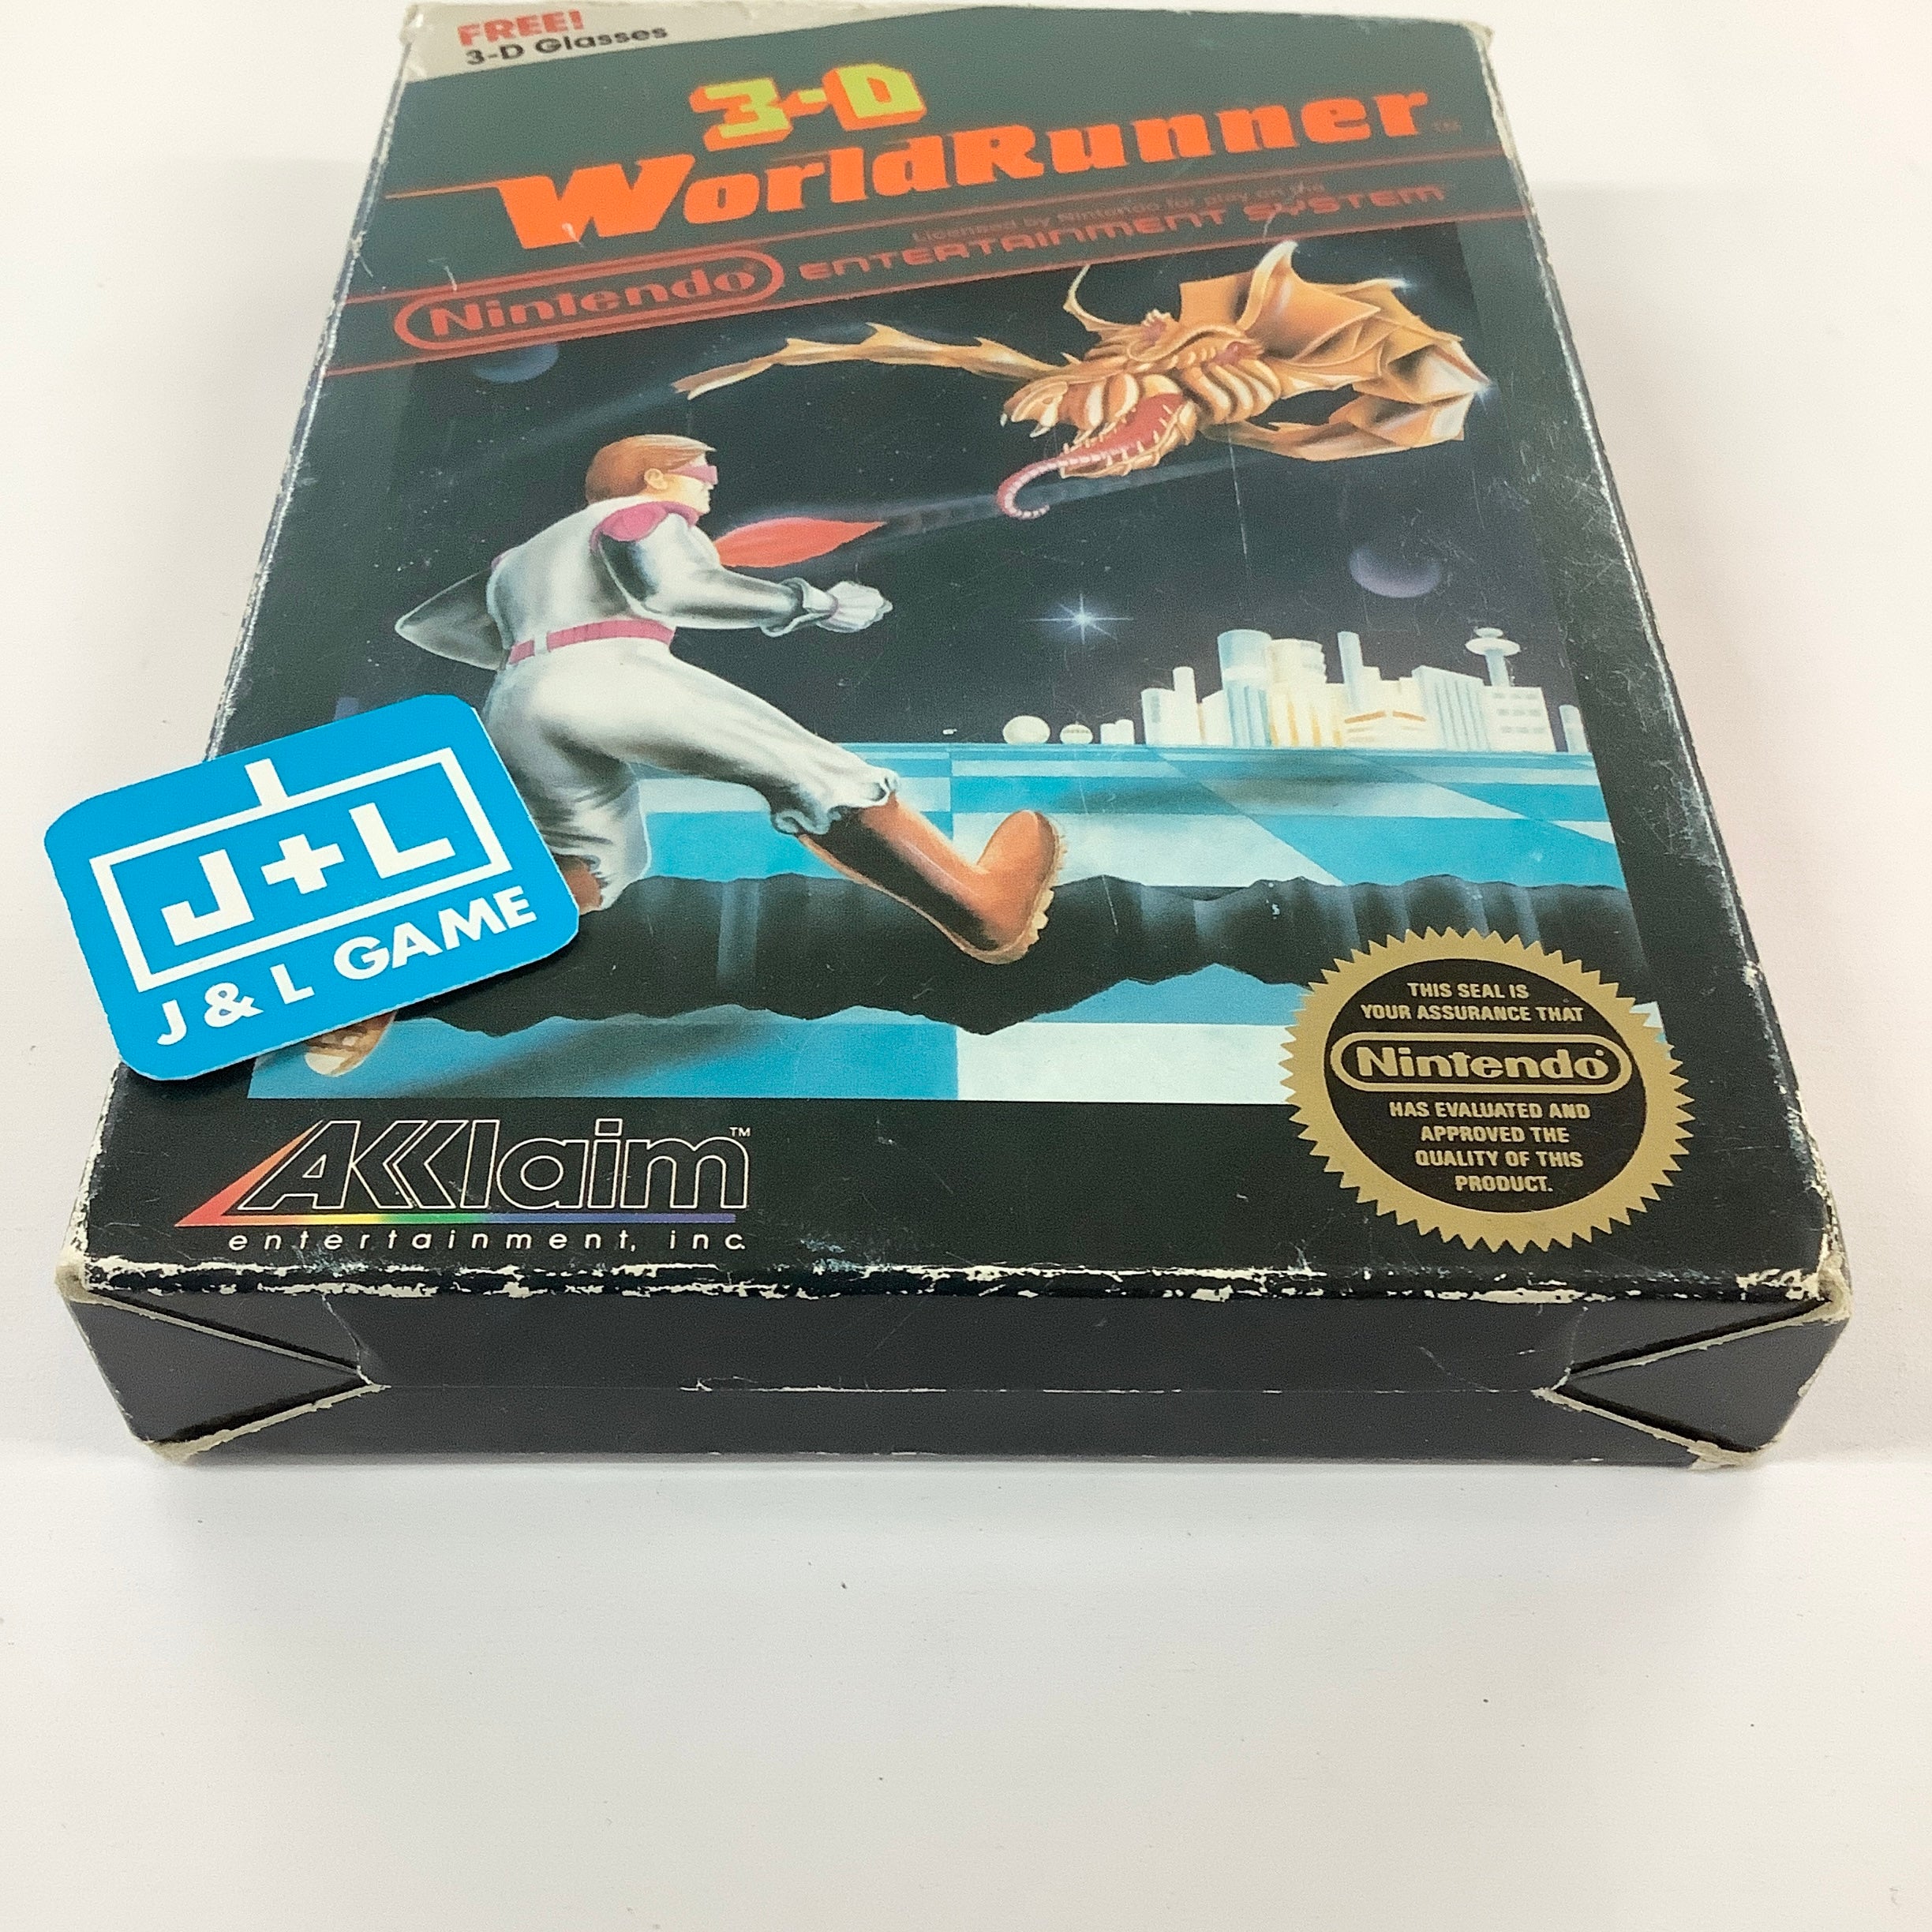 3-D WorldRunner - (NES) Nintendo Entertainment System [Pre-Owned] Video Games Acclaim   